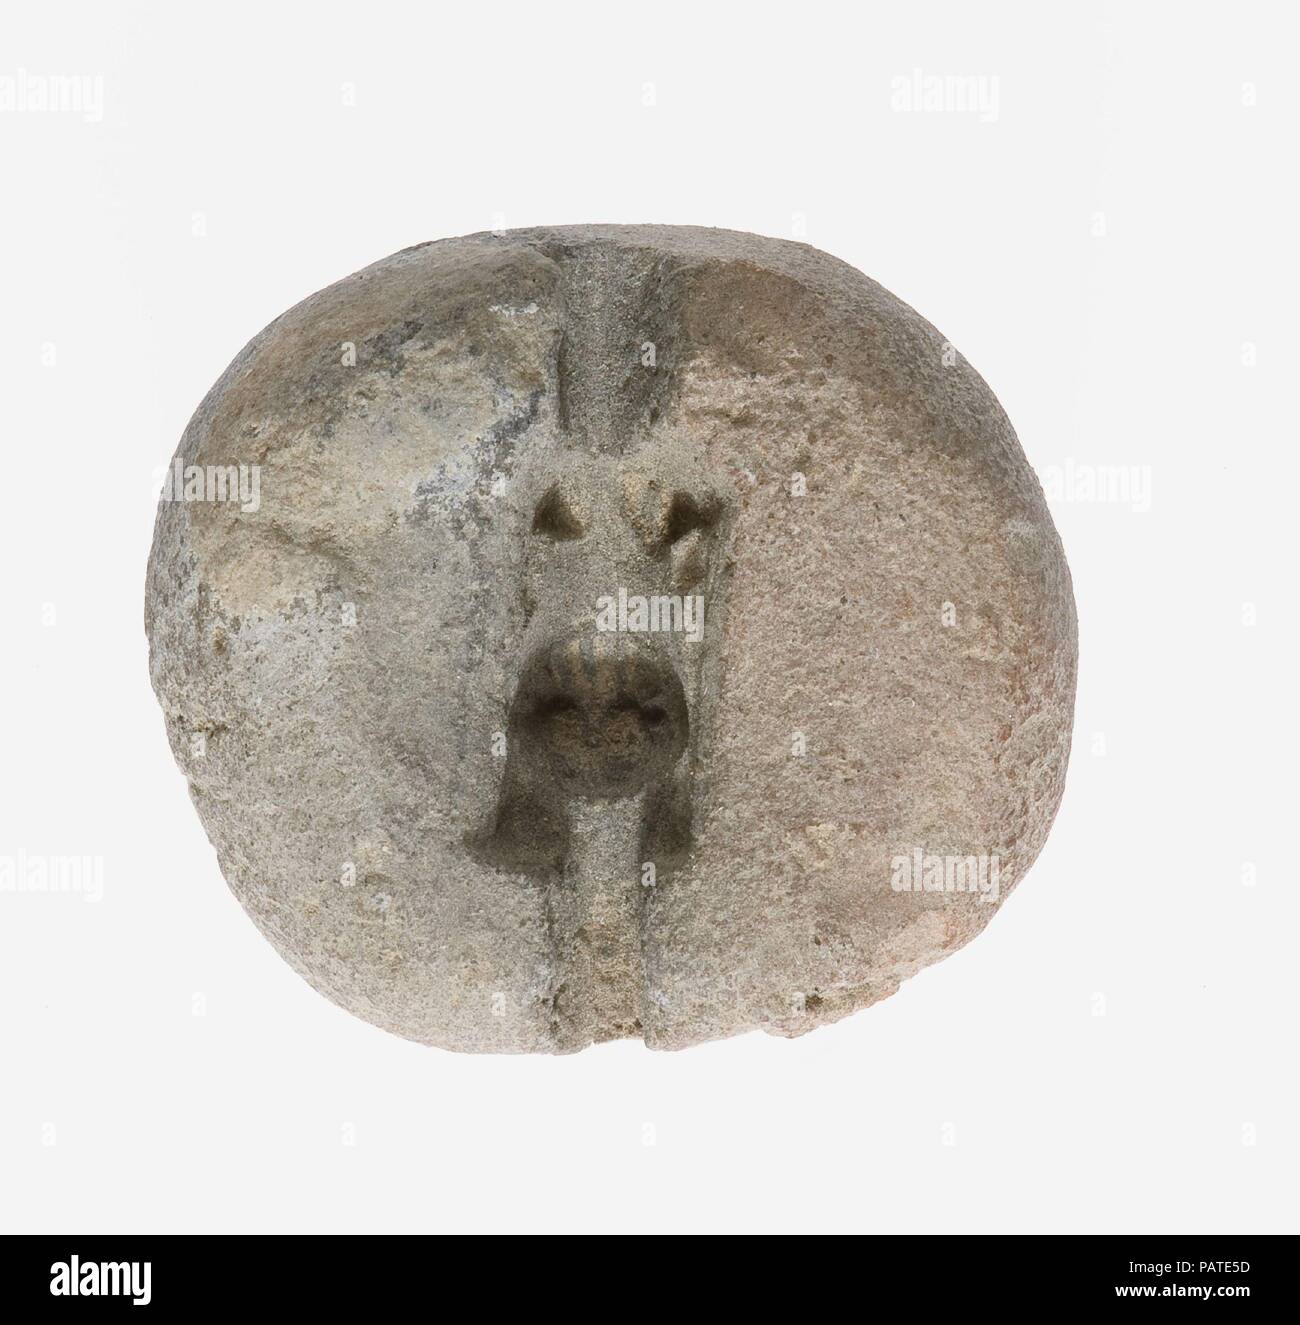 Mold for a Lion Amulet. Dimensions: L. 1.7 cm (11/16 in); w. 1.5 cm (9/16 in). Dynasty: Dynasty 18. Reign: reign of Amenhotep III. Date: ca. 1390-1353 B.C.. Museum: Metropolitan Museum of Art, New York, USA. Stock Photo